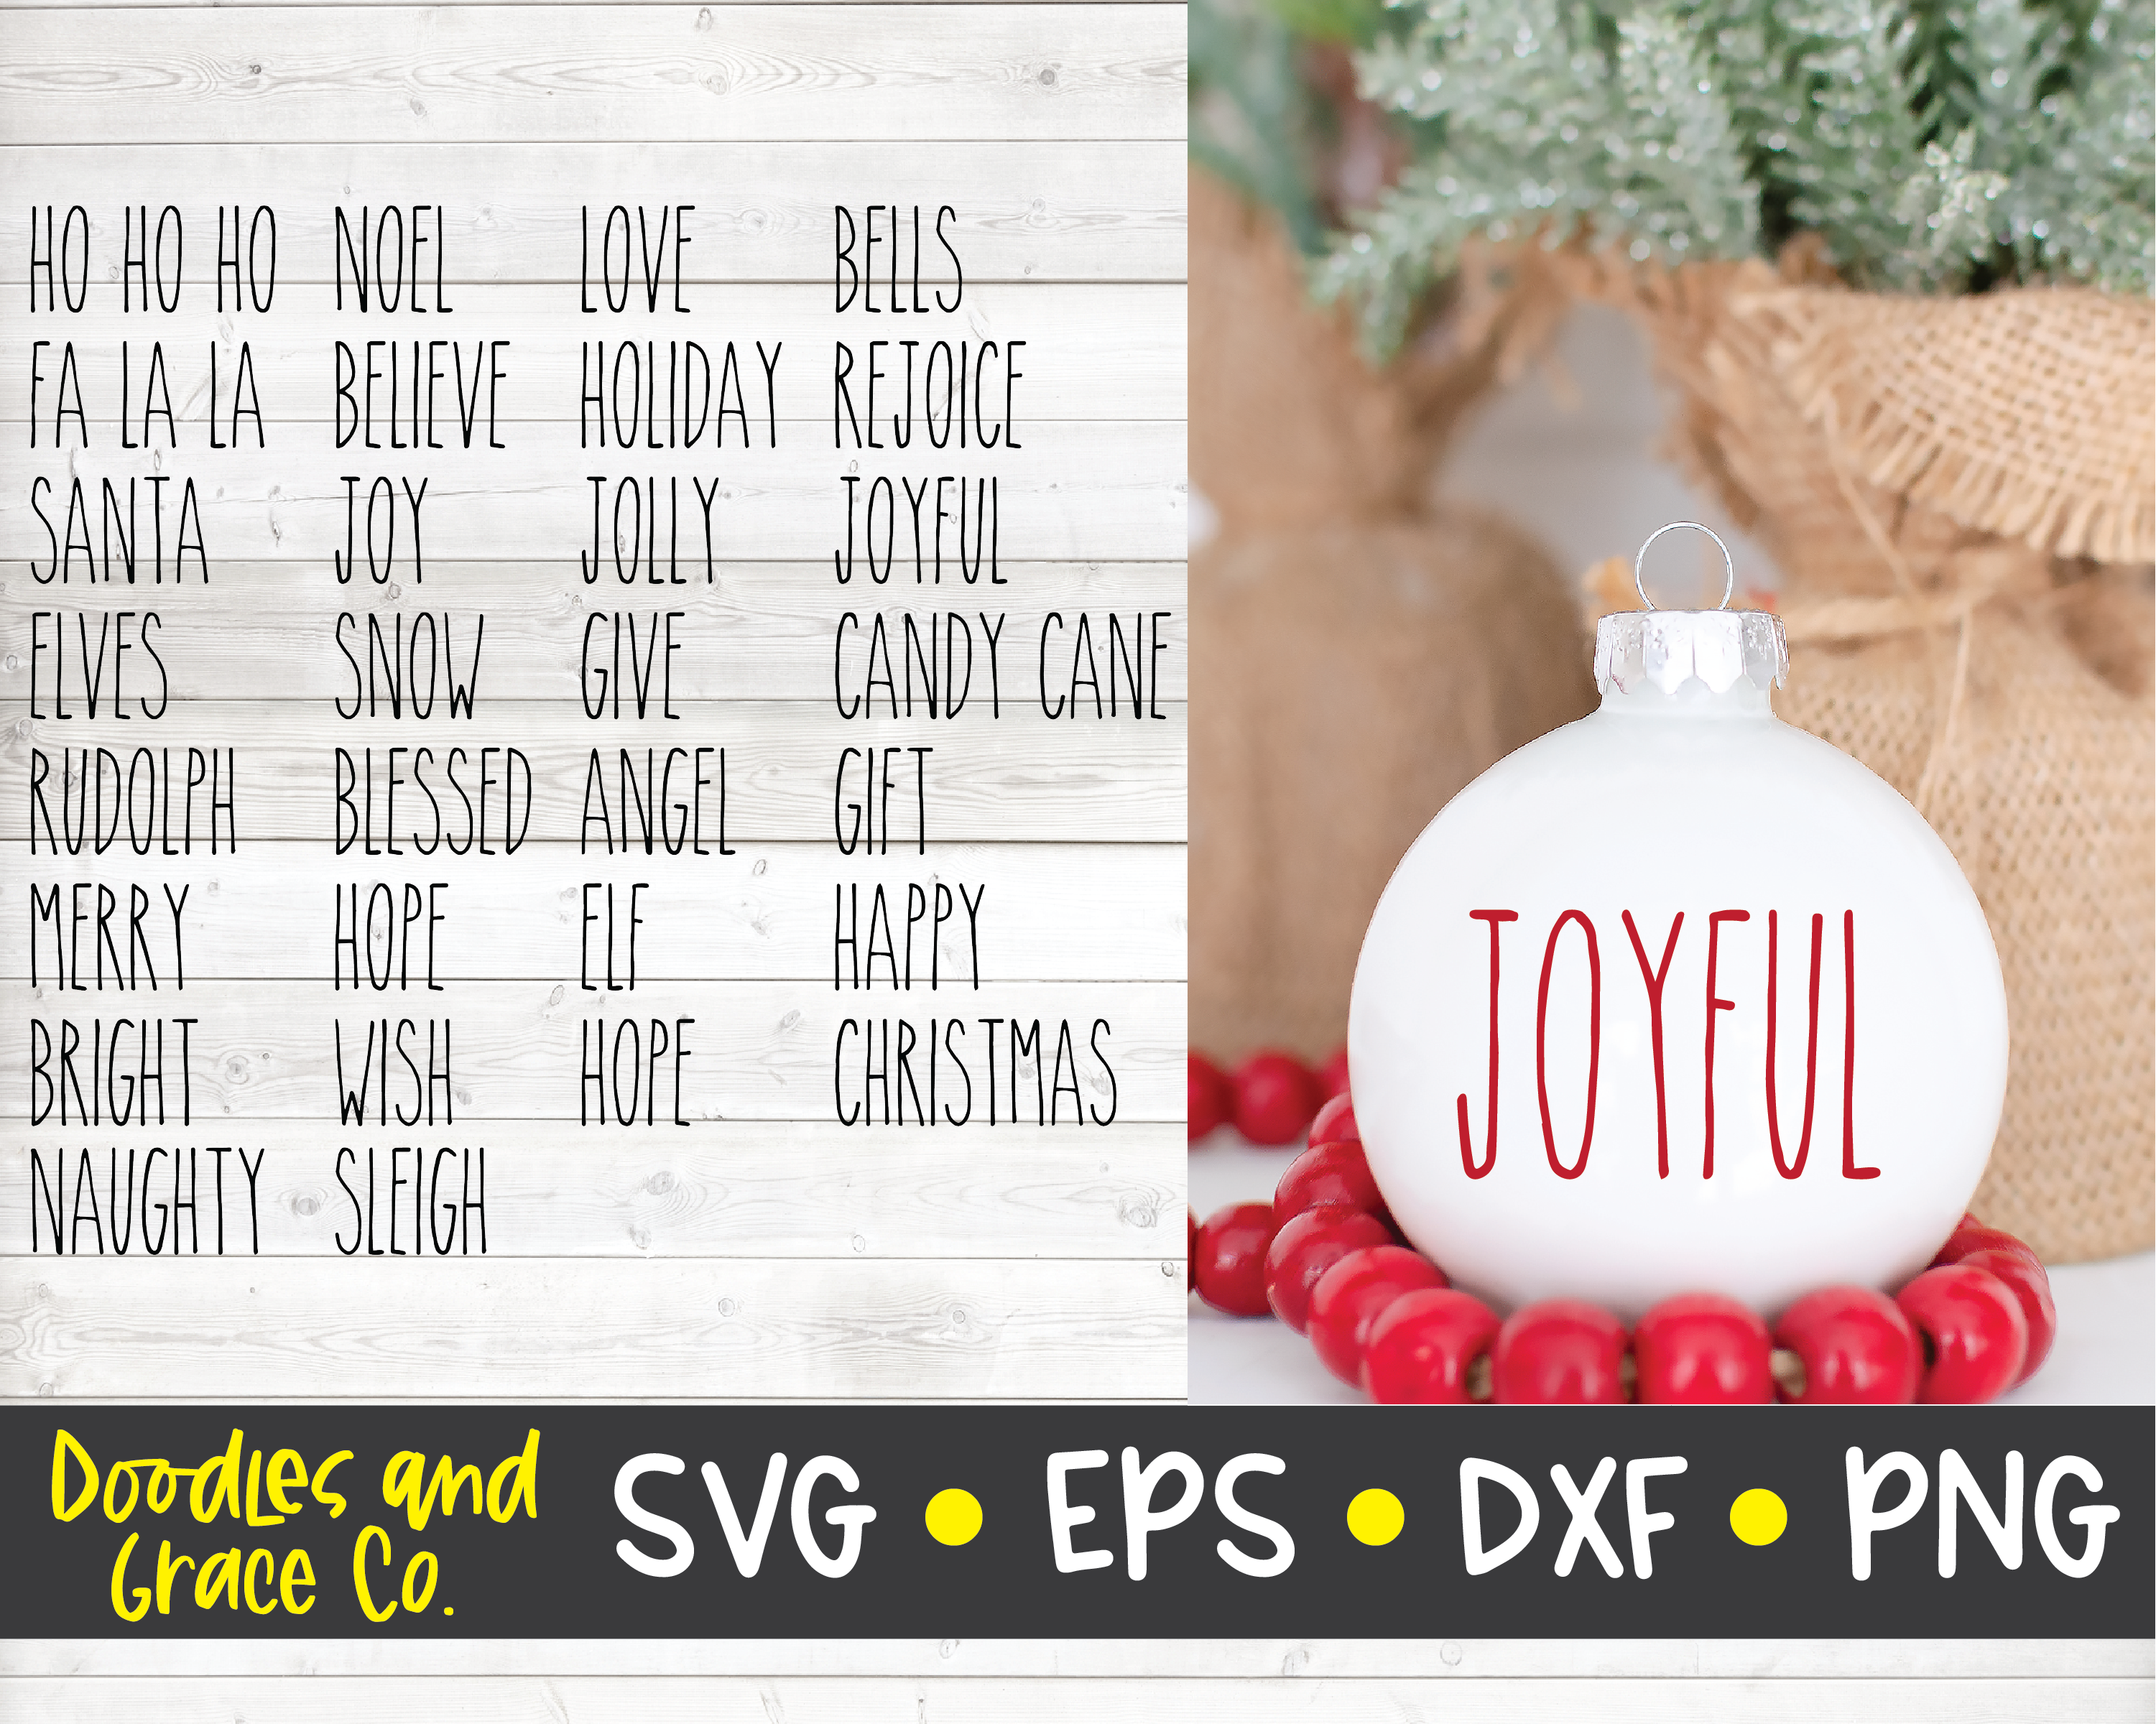 Rustic Christmas Words Christmas Svg Cut File Svg Dxf Eps Png By Doodles And Grace Thehungryjpeg Com